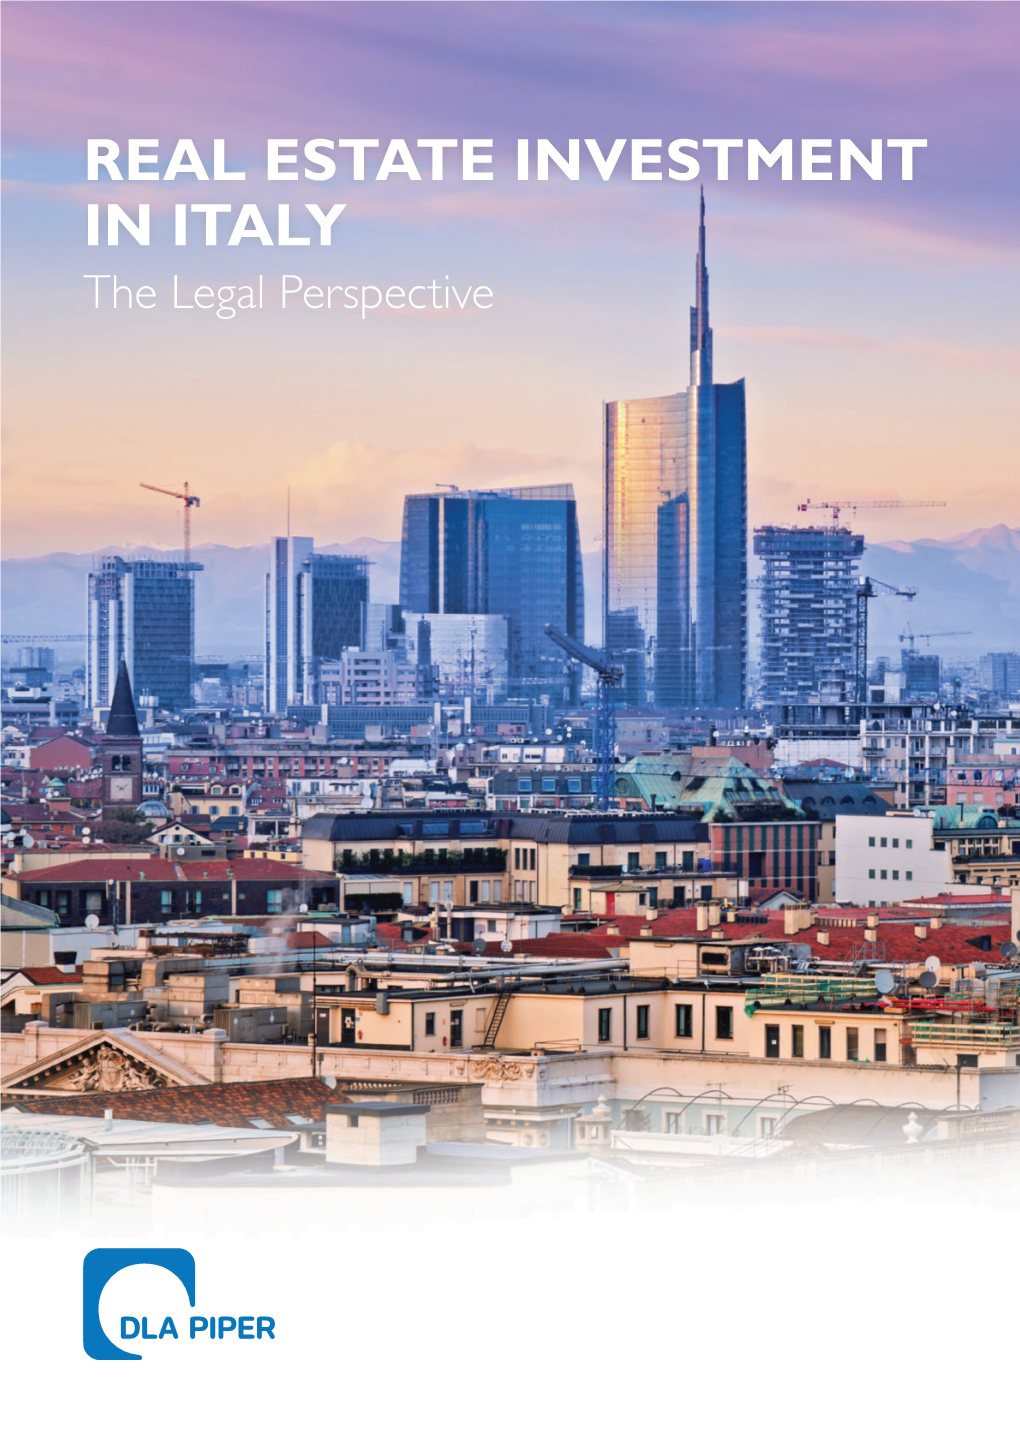 REAL ESTATE INVESTMENT in ITALY the Legal Perspective